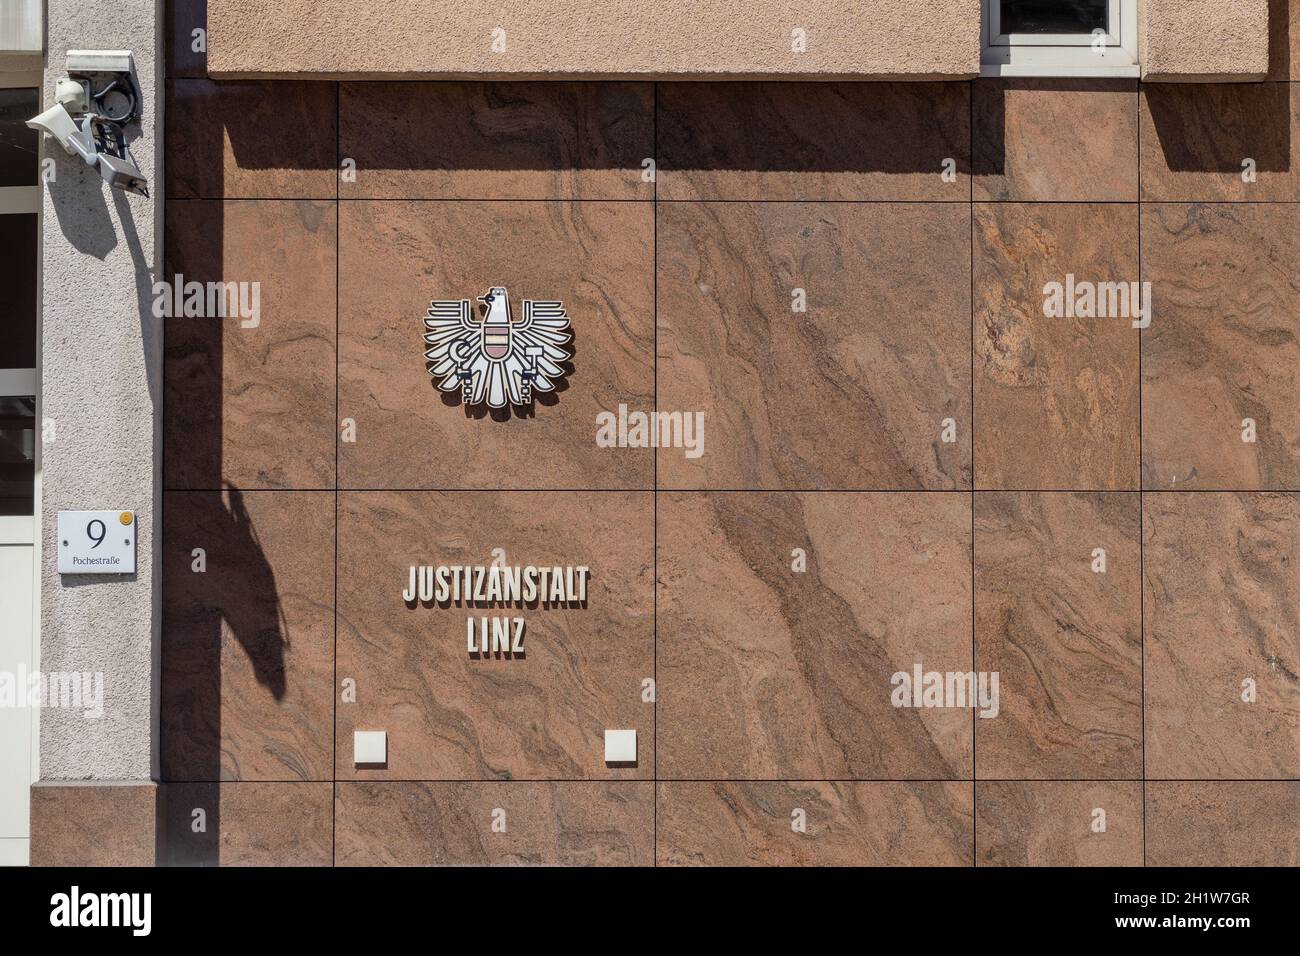 Inscription „Justizanstalt“ and a stylised Eagle - Austrian Coat of Arms – on the Wall of the Prison of the Regional Court - Linz Stock Photo